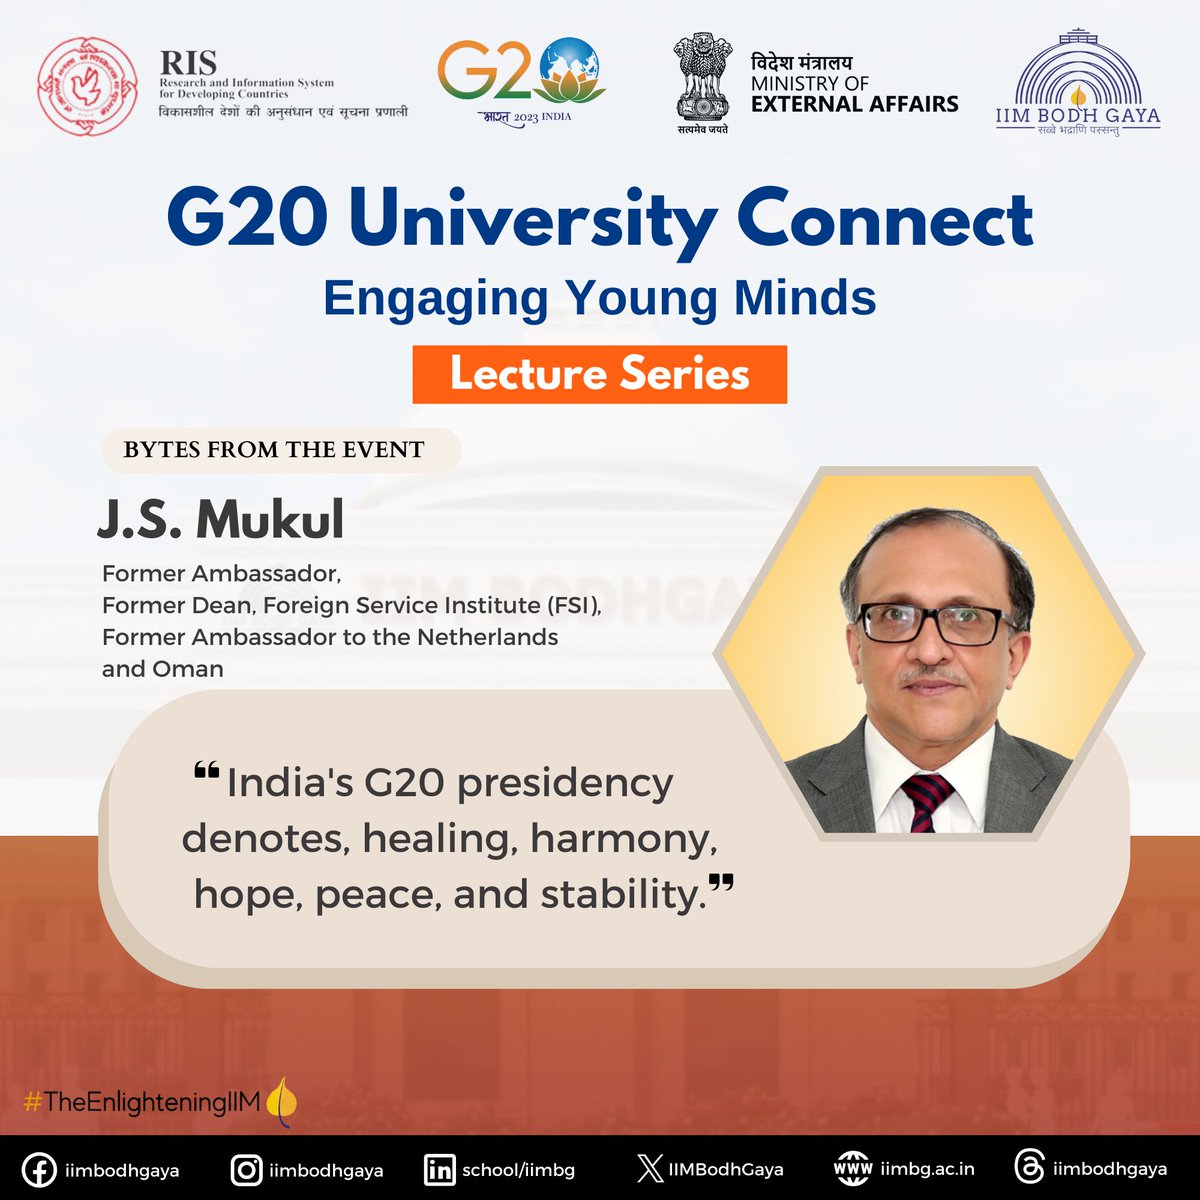 Mr. J. S. Mukul, Former Ambassador, addressing the G20 Lecture Series at IIM Bodh Gaya delved deeper into the ideas of the G20 and the stakes it holds for India.

#G20 #Universityconnect #moe #NarendraModi #guestlecture #innovation #G20India2023 #G20India #G20Summit #iimbodhgaya